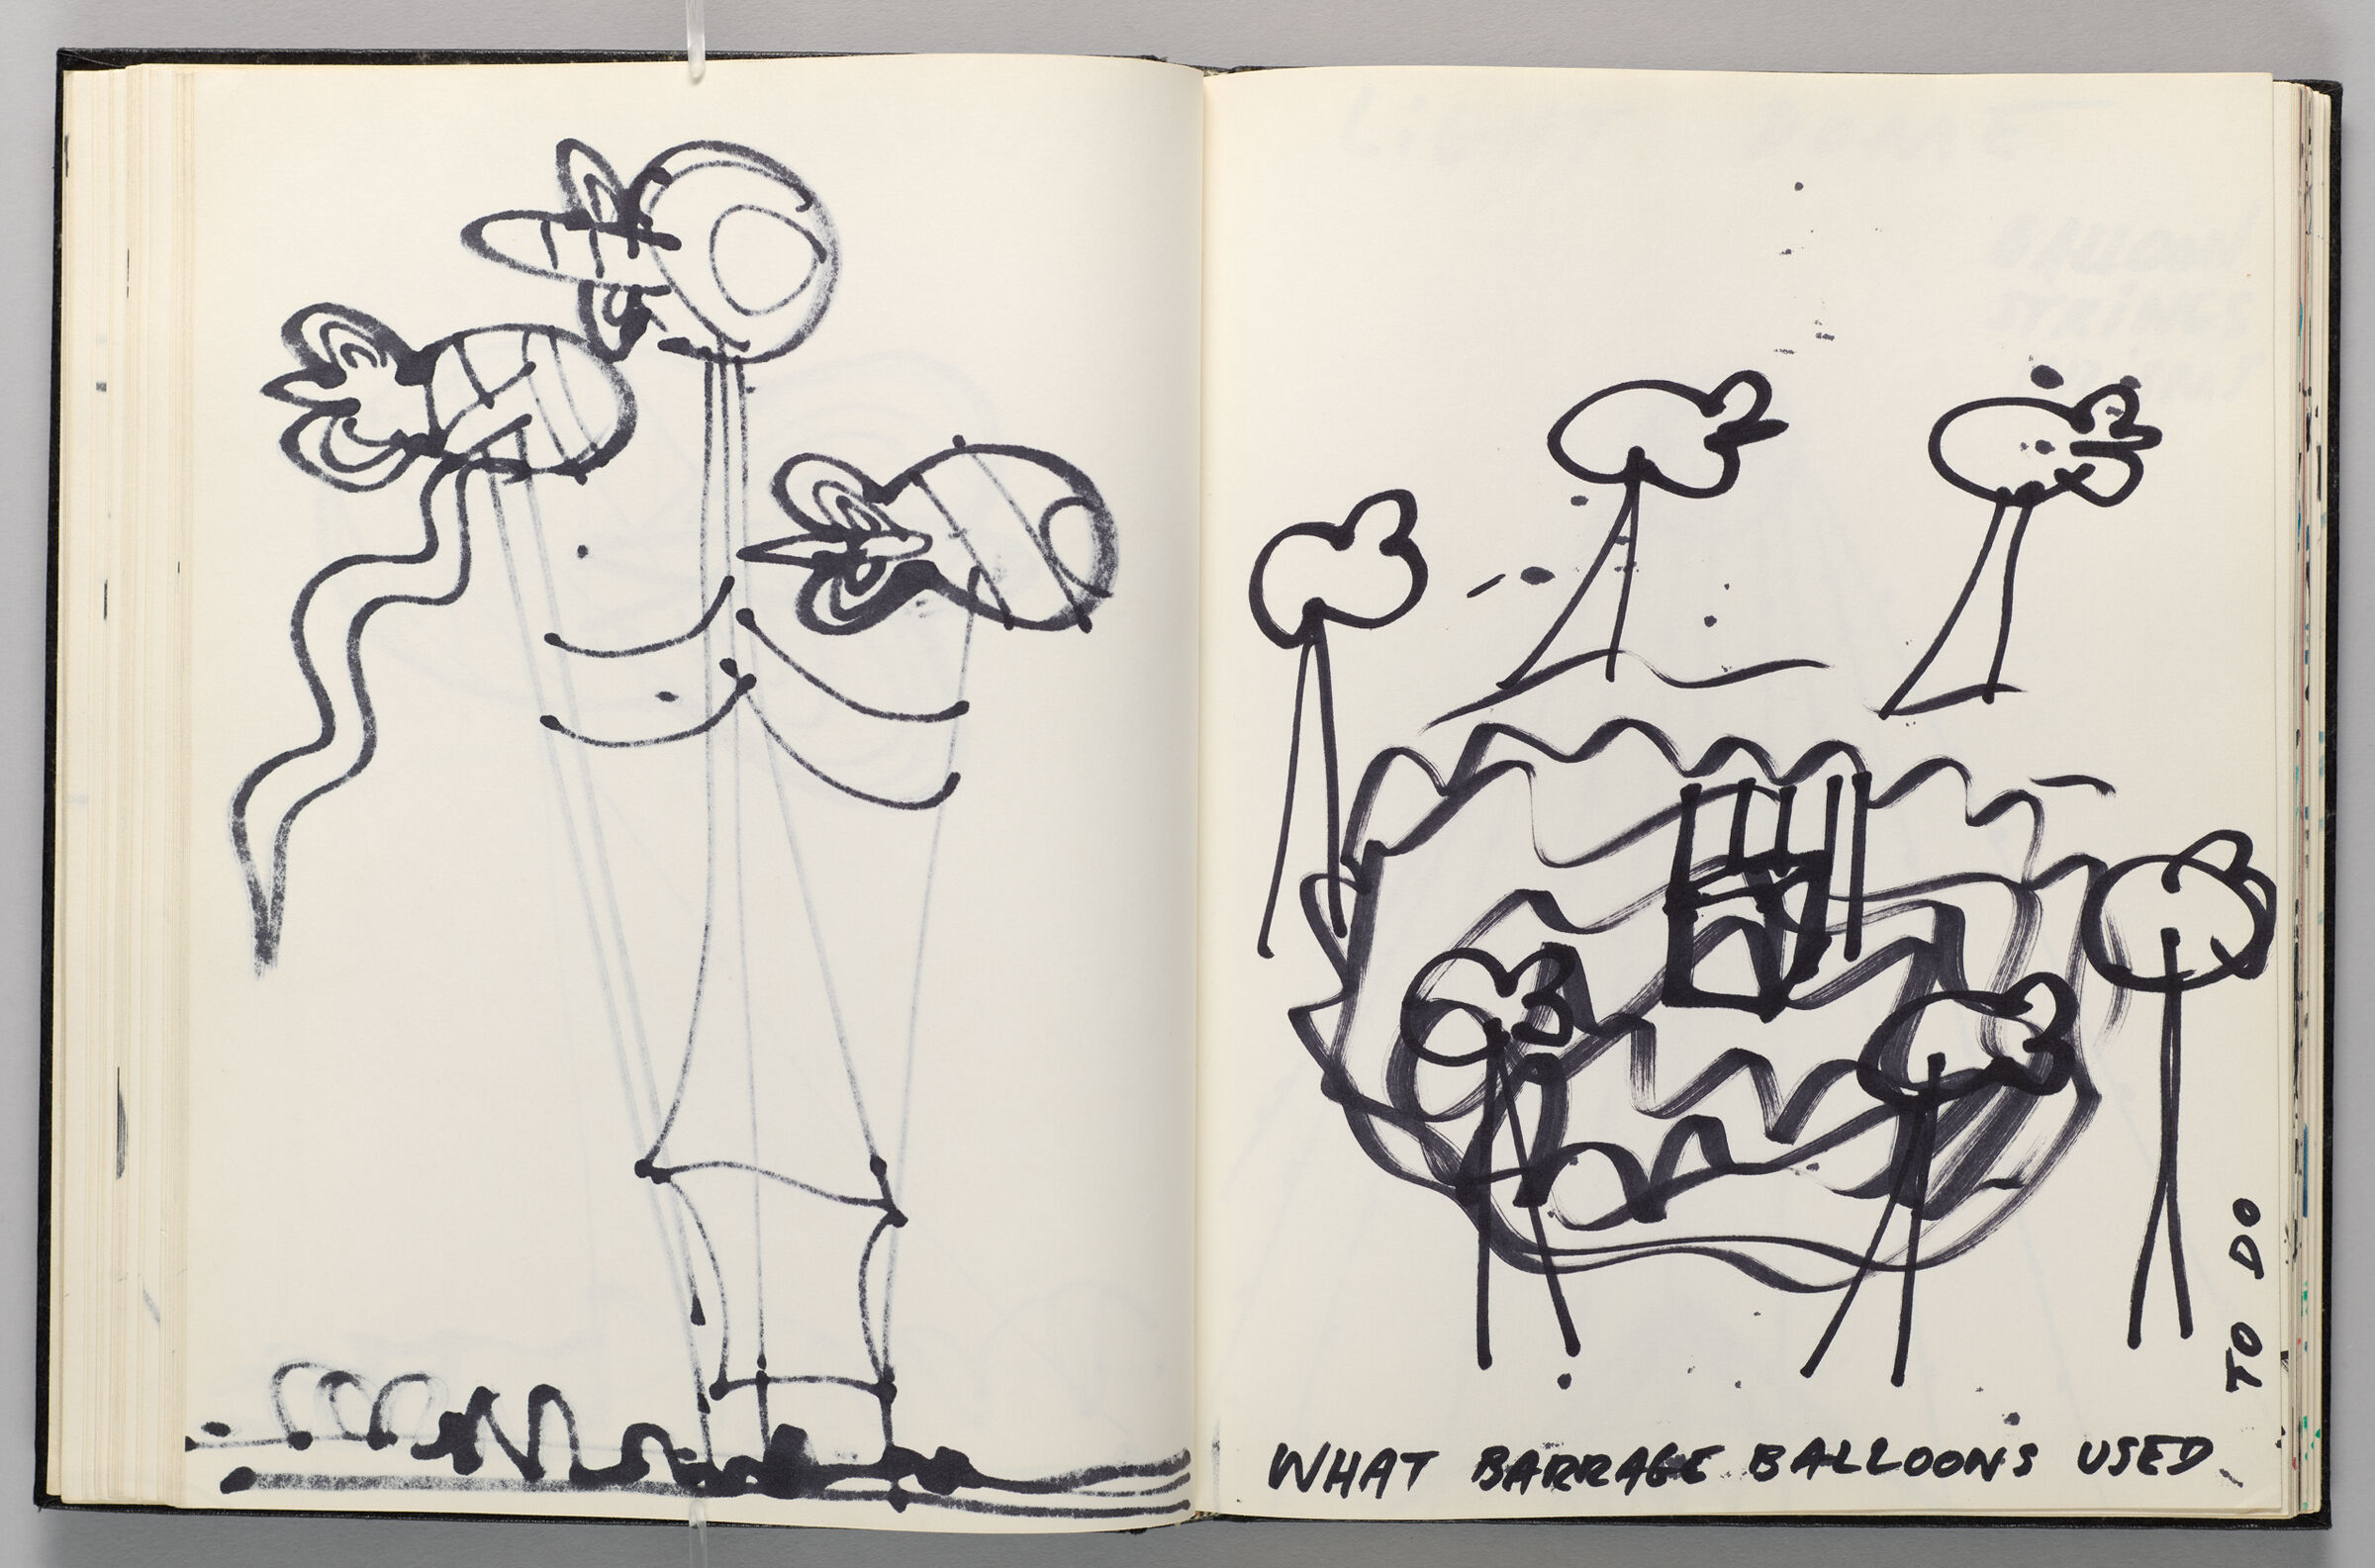 Untitled (Bleed-Through Of Previous Page, Left Page); Untitled (Barrage Balloons, Right Page)